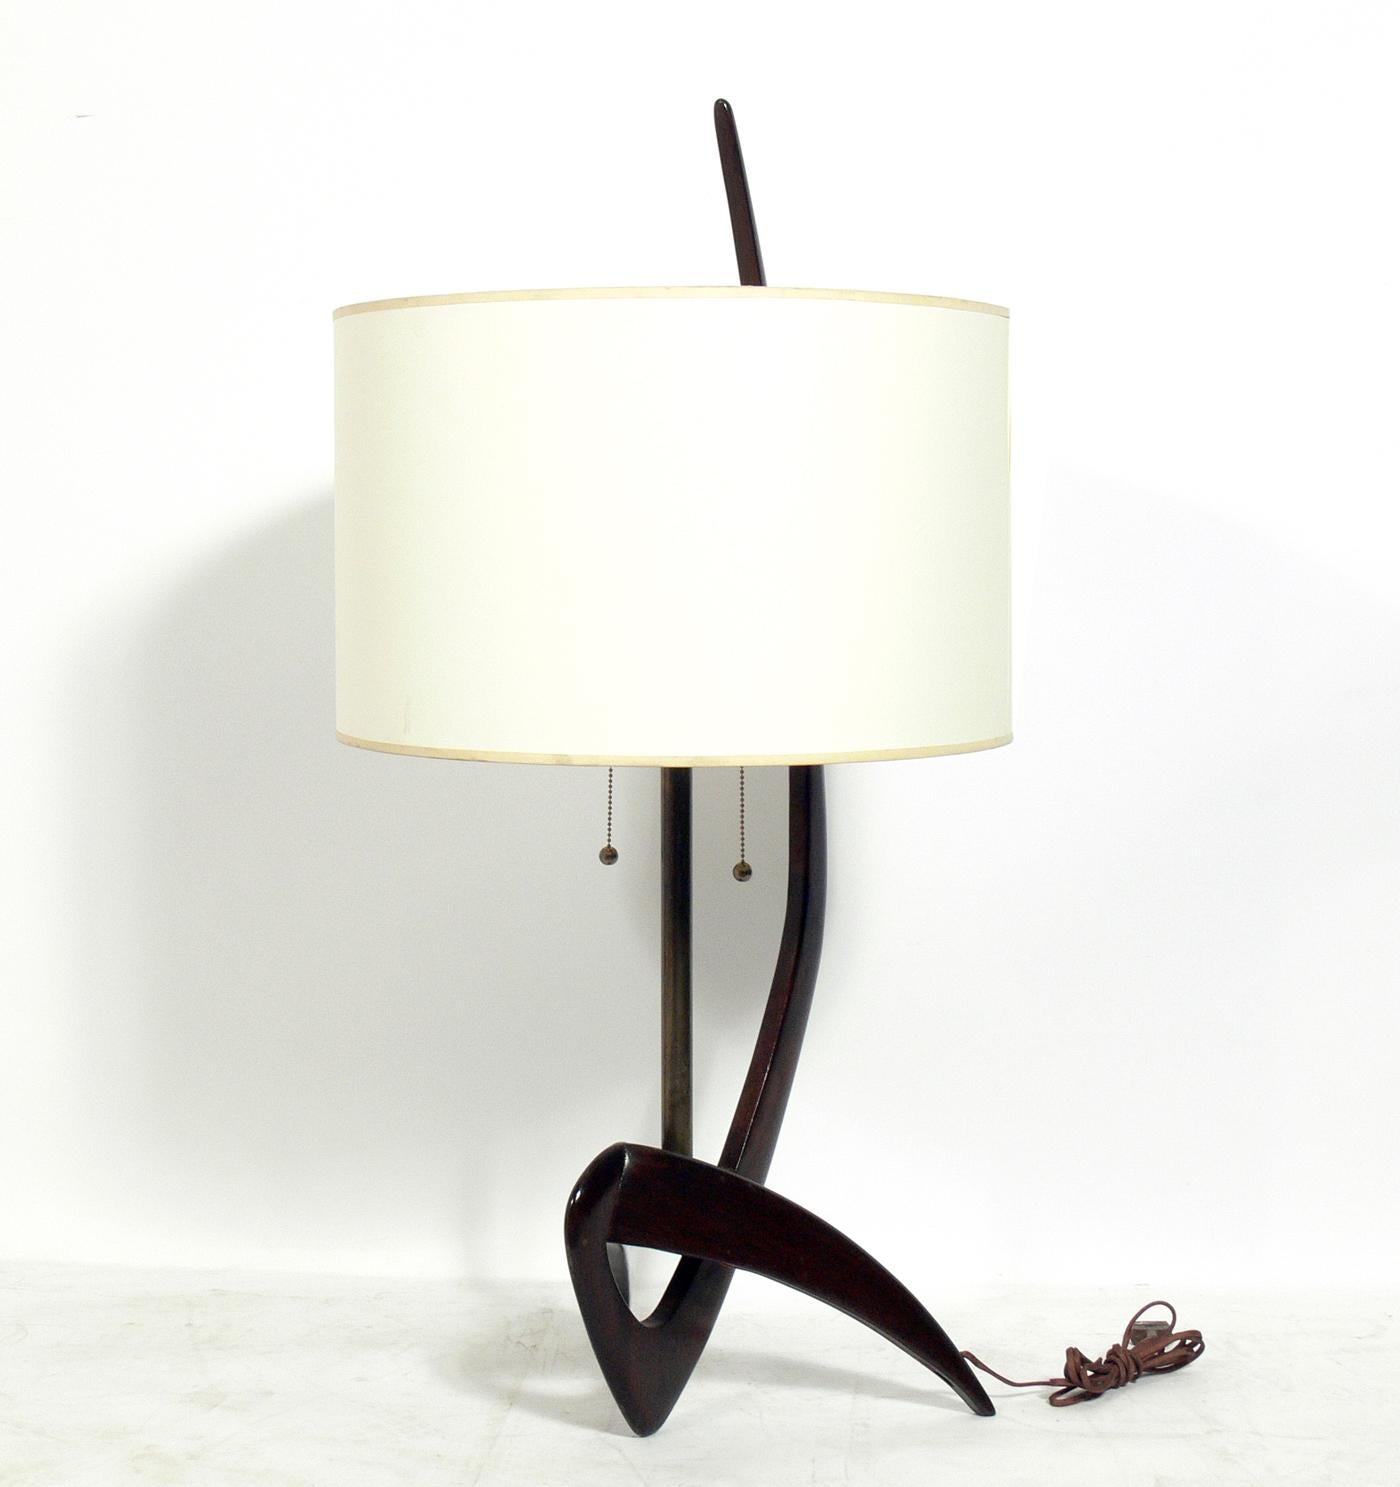 Sculptural modern lamp, believed to be Italian, circa 1960s. It has been rewired and is ready to use. The price noted below includes the shade.